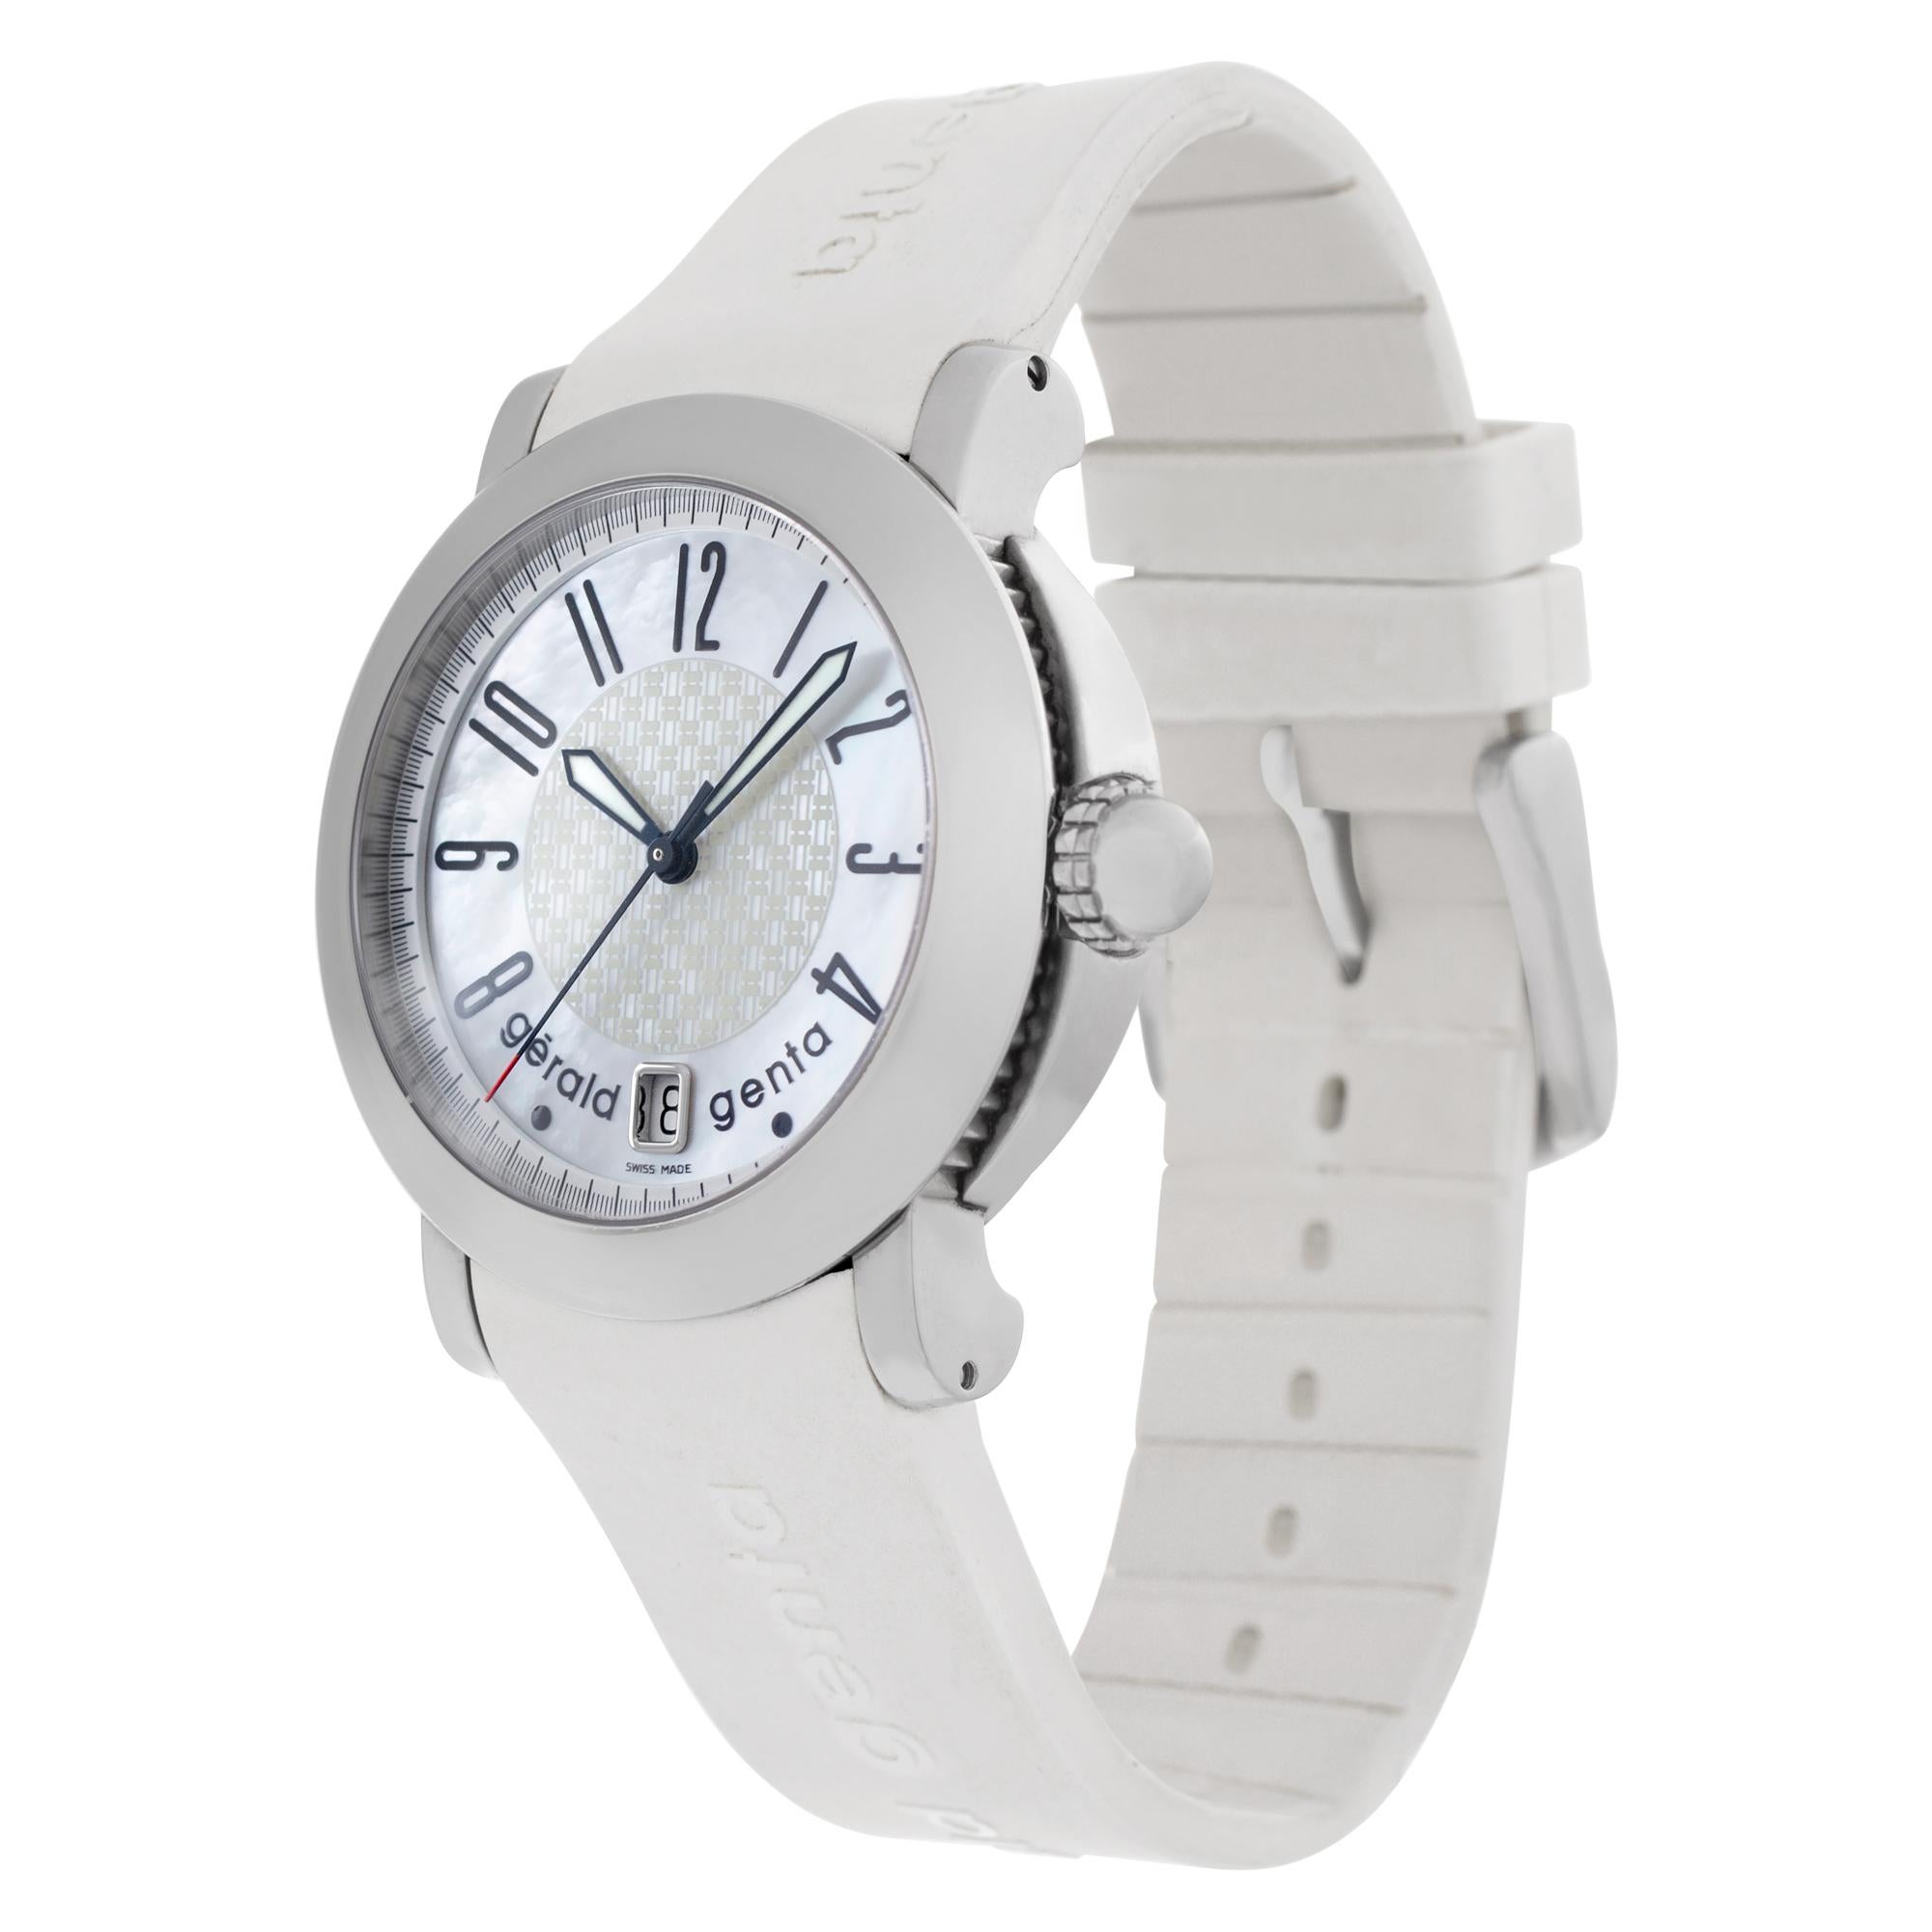 Gerald Genta Sport in stainless steel with Mother of Pearl dial on white rubber strap. Auto w/ sweep seconds and date. Box, booklets and papers. 39.5 mm case size. Ref ssp.l.10. Circa 2010s. Fine Pre-owned Gerald Genta Watch.

Certified preowned